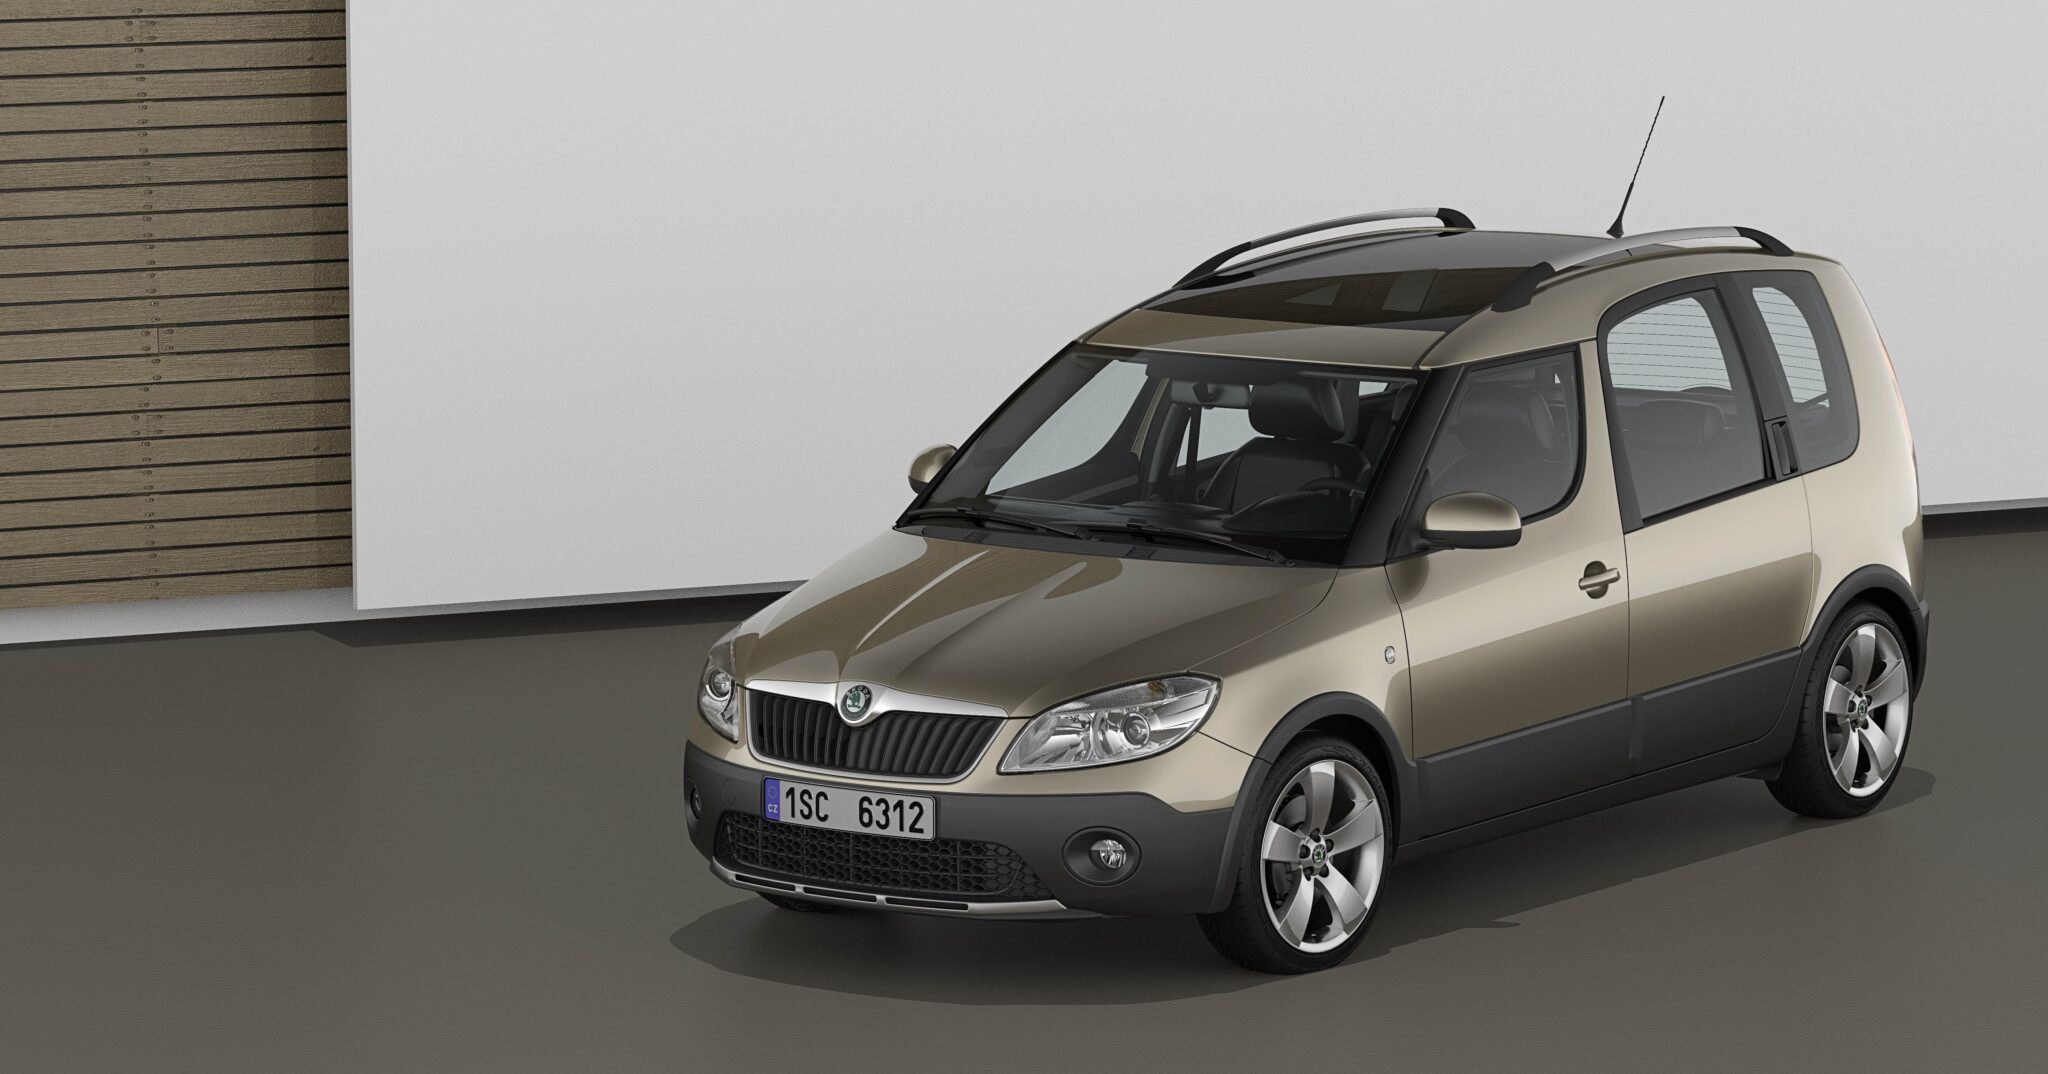 5 Reasons – The Skoda Roomster – Not £2 Grand